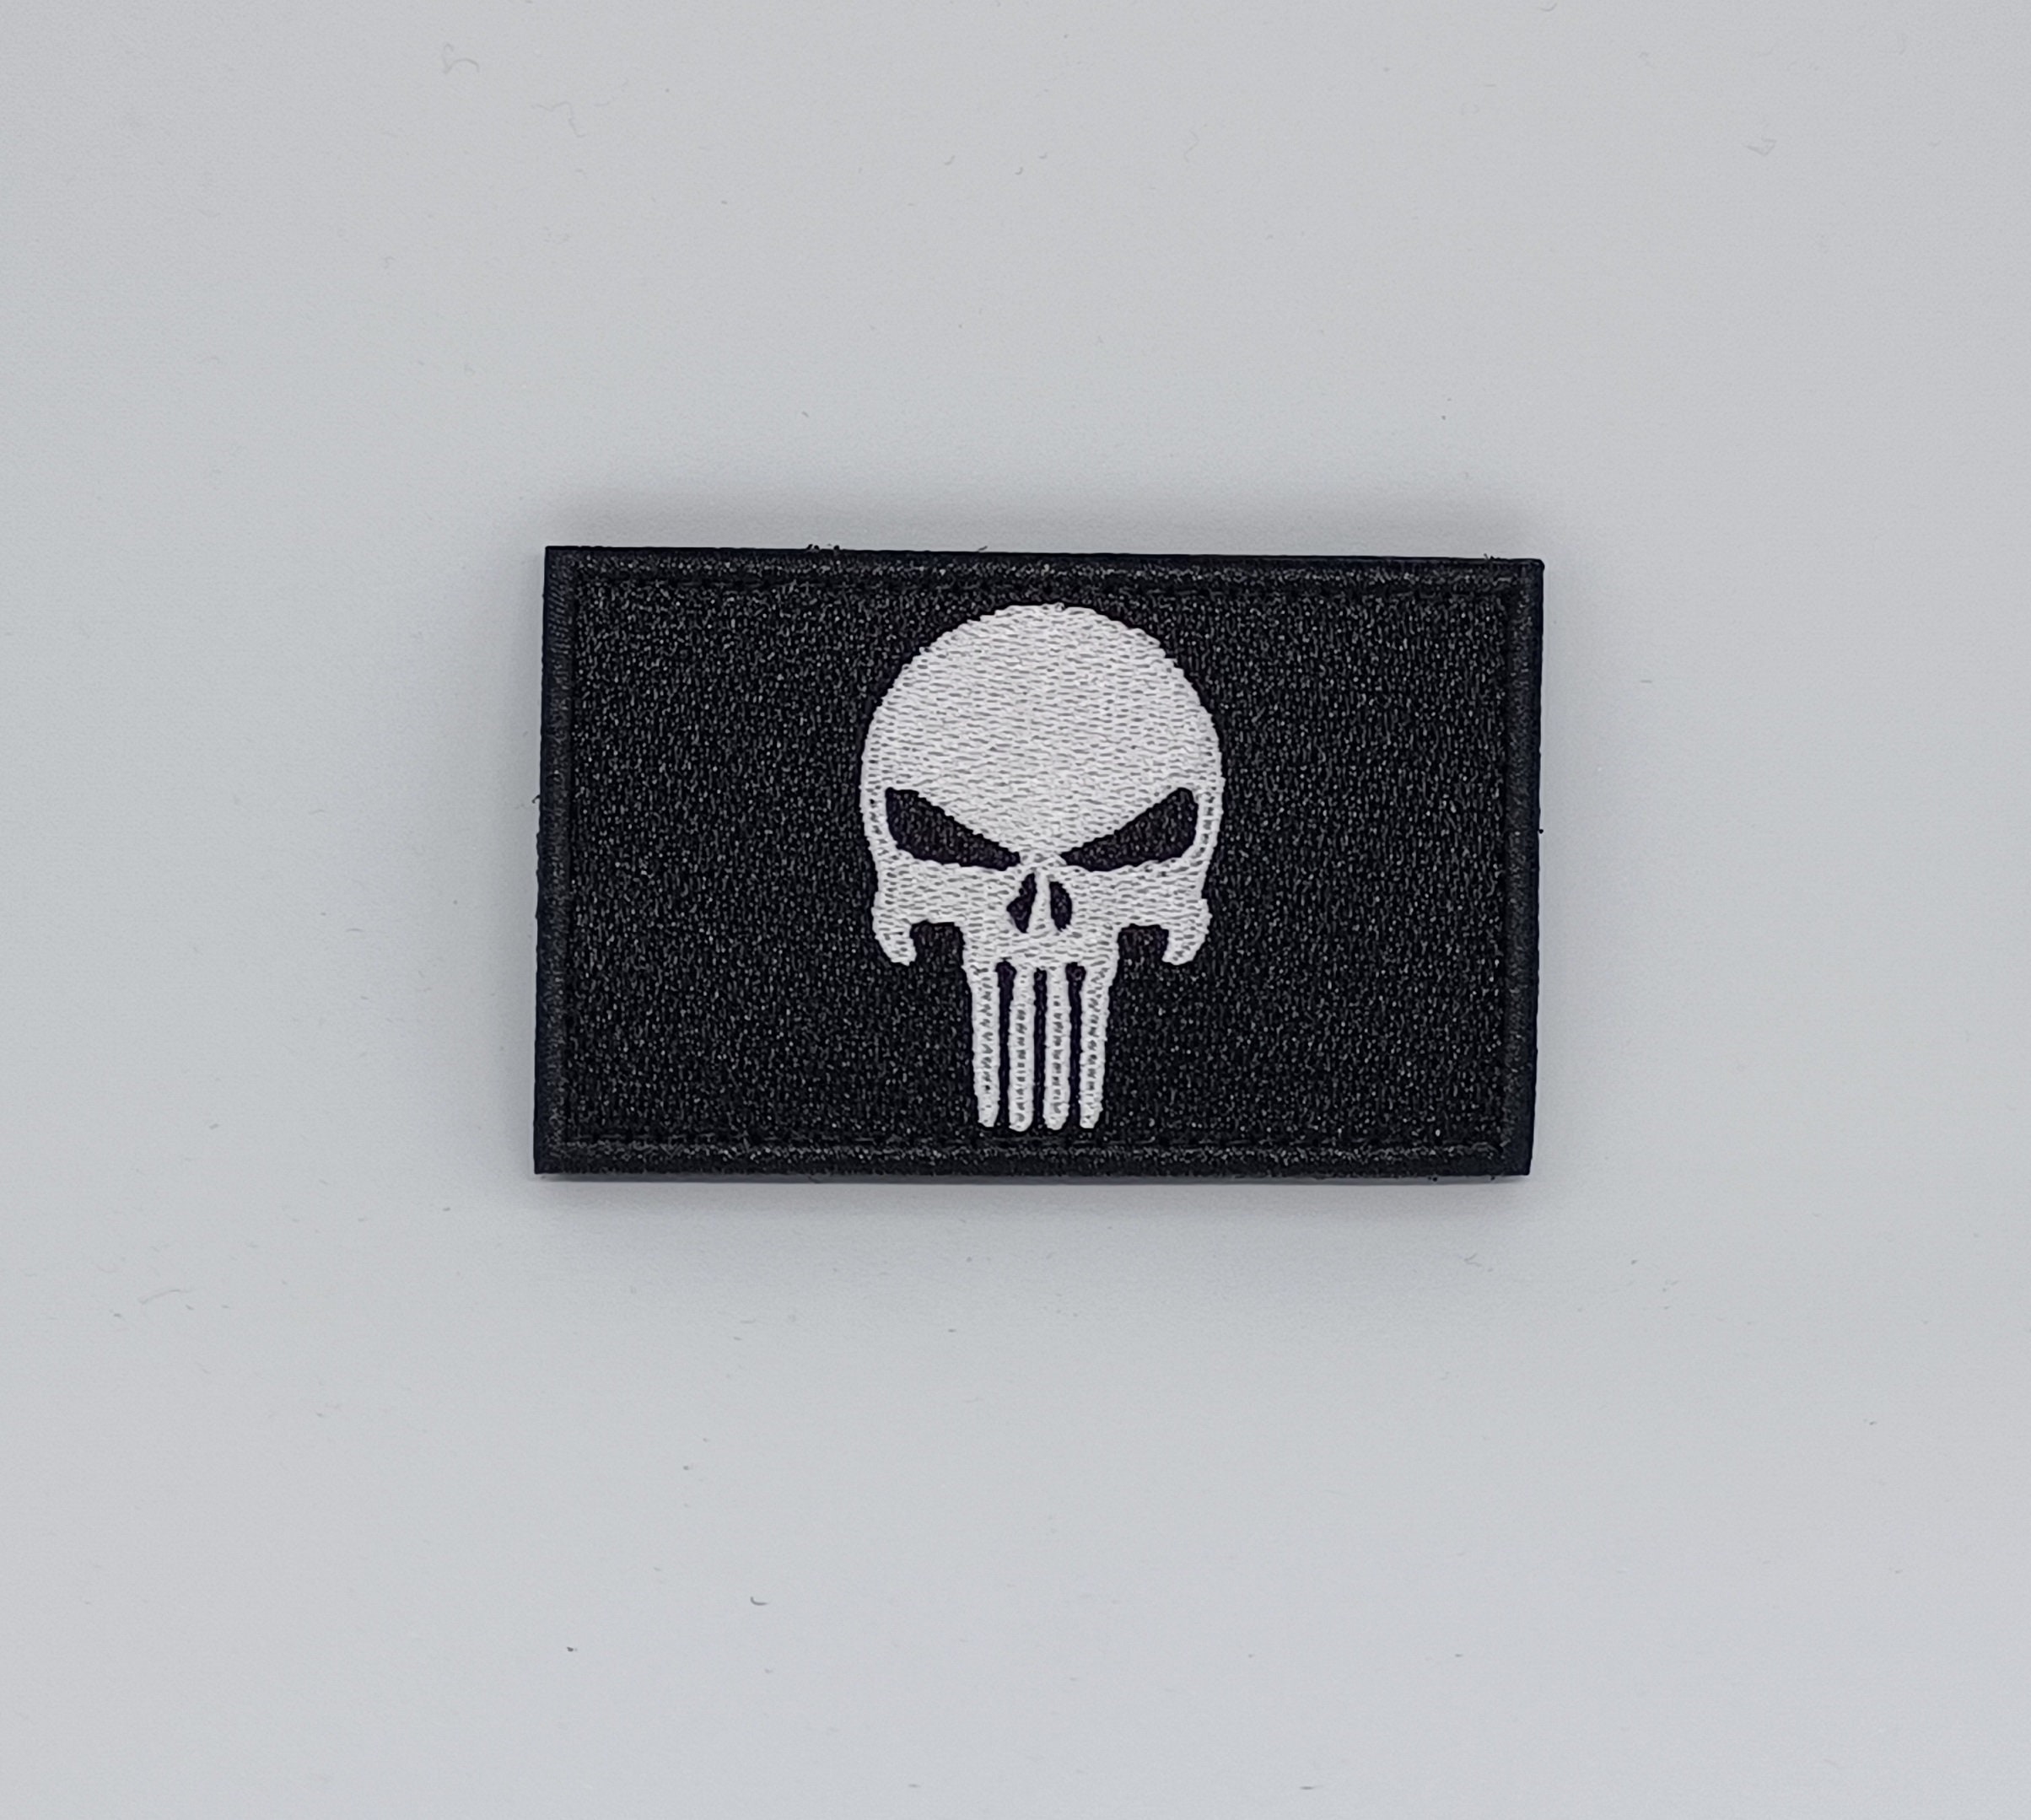 Ukraine Punisher Patch / Badge - Tactical Morale Patch ( Sticky / Hook  Backed